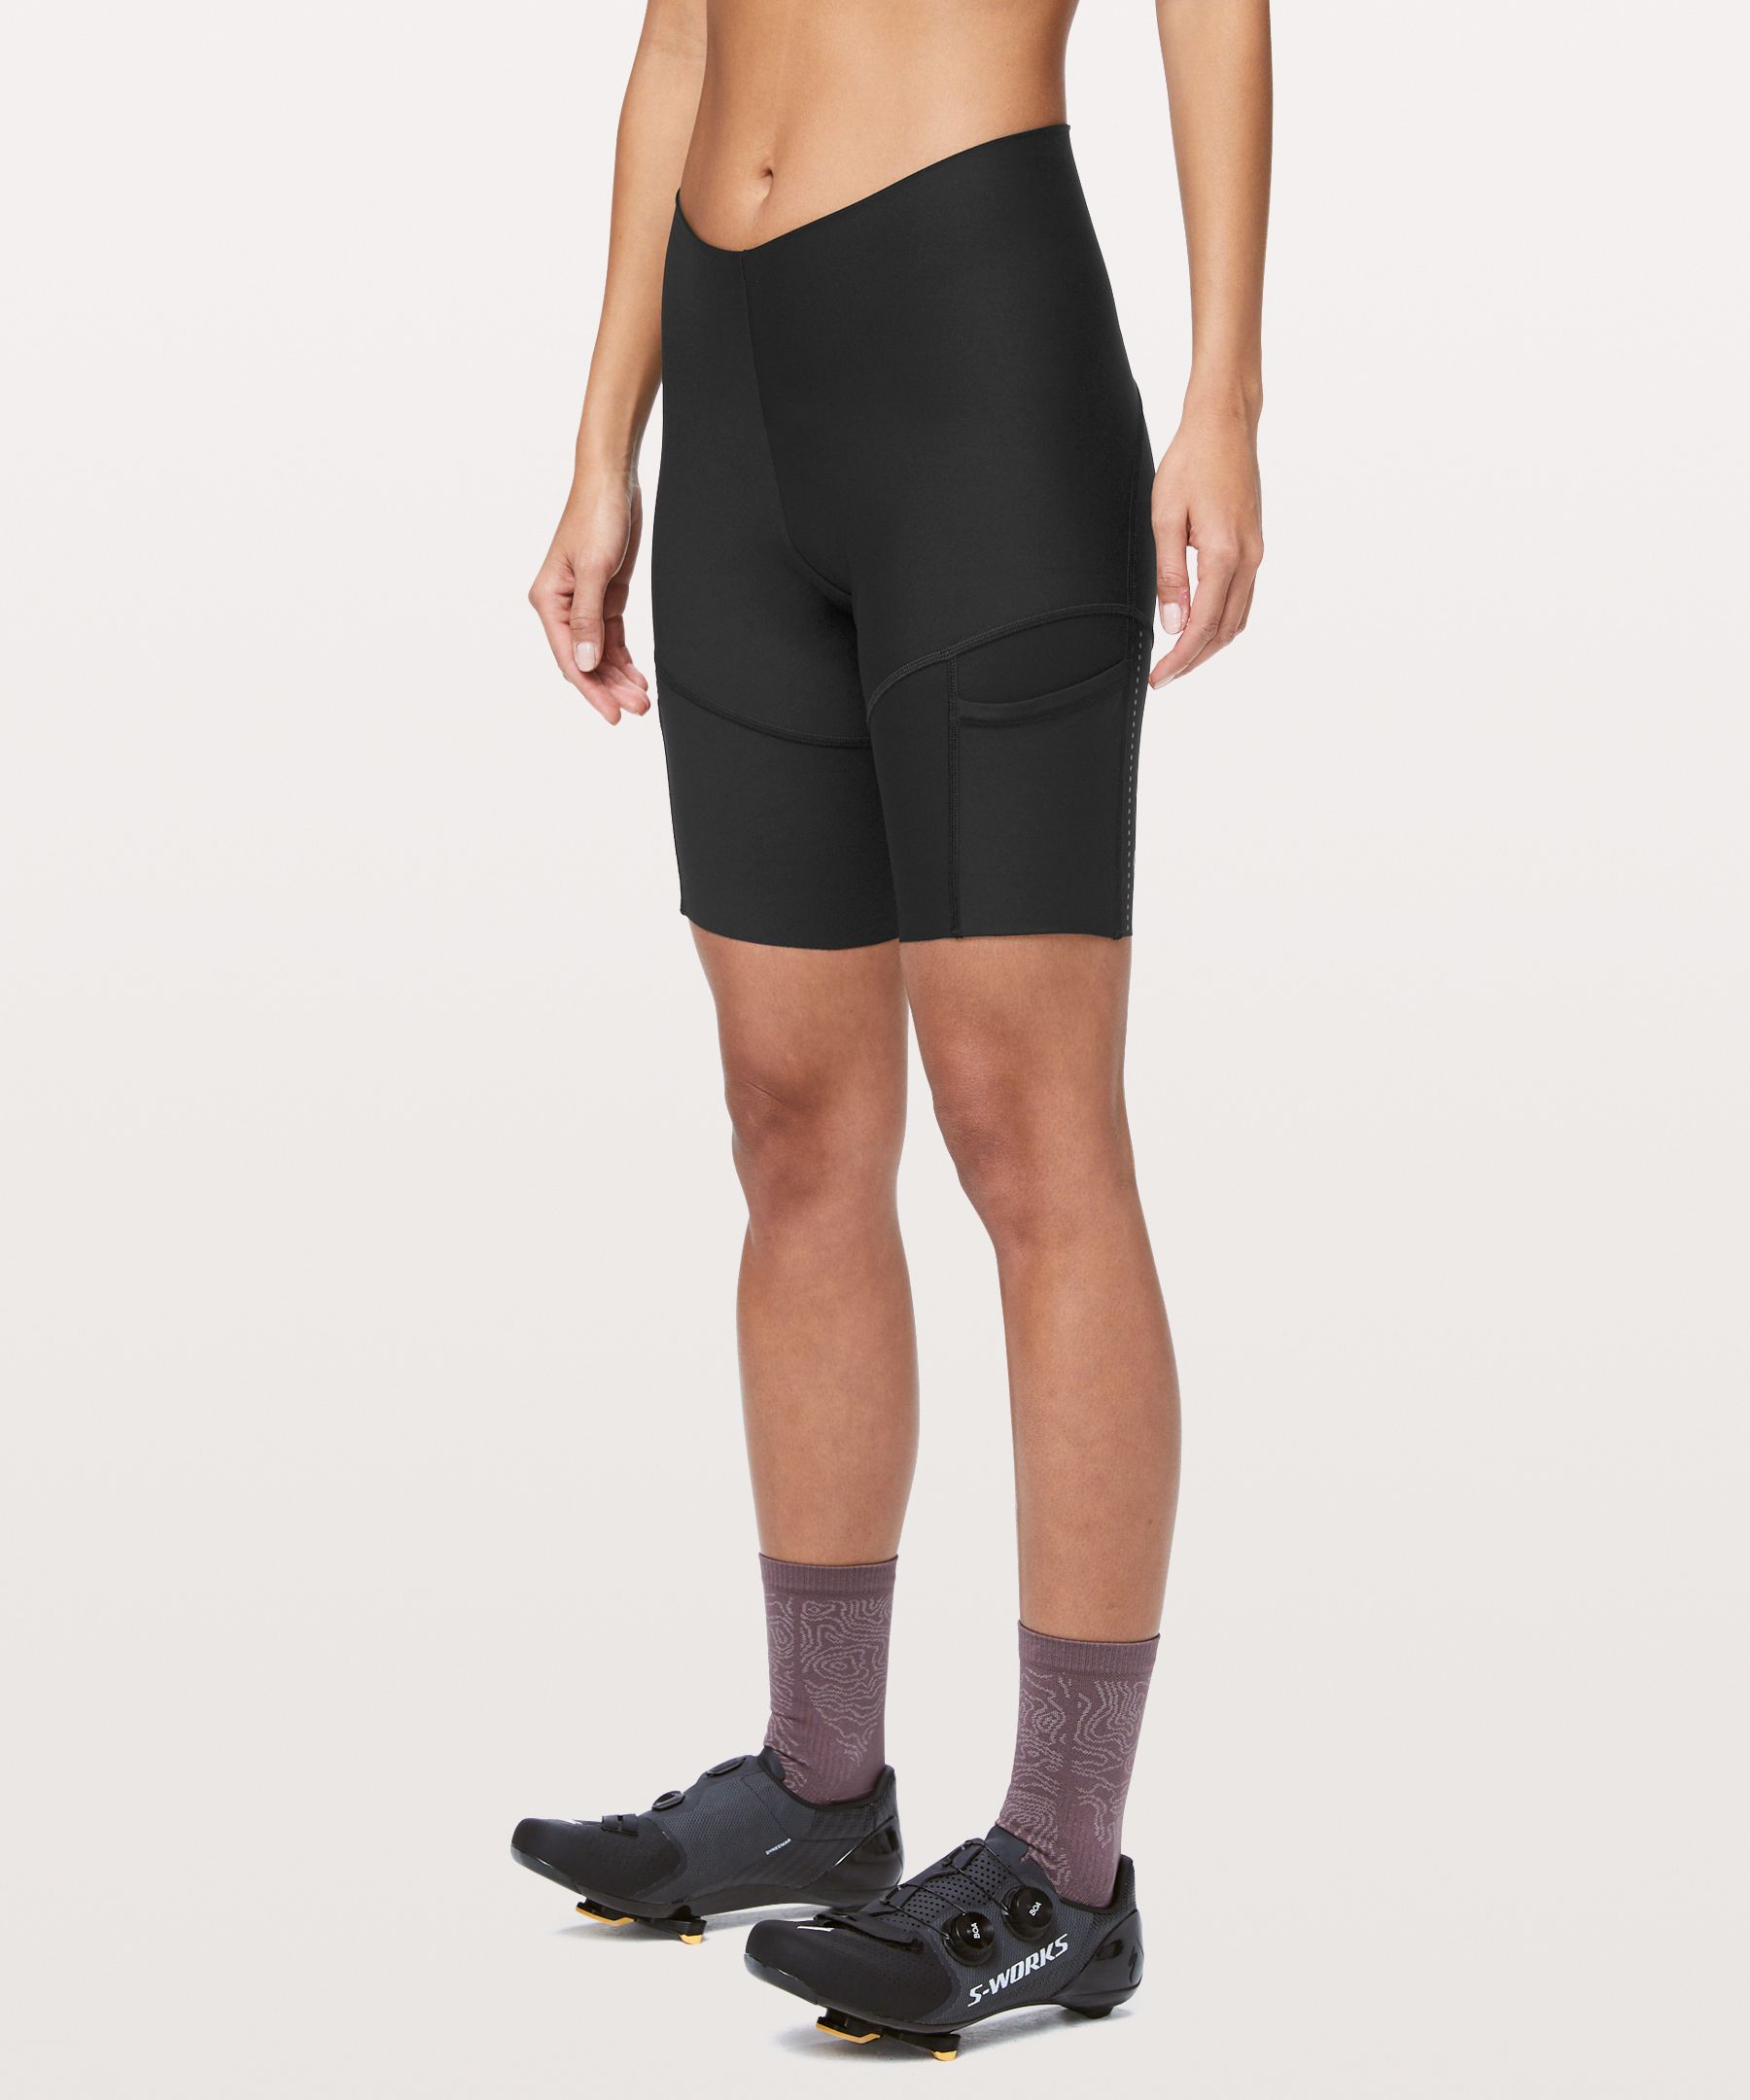 City To Summit Cycling Short | Women's 